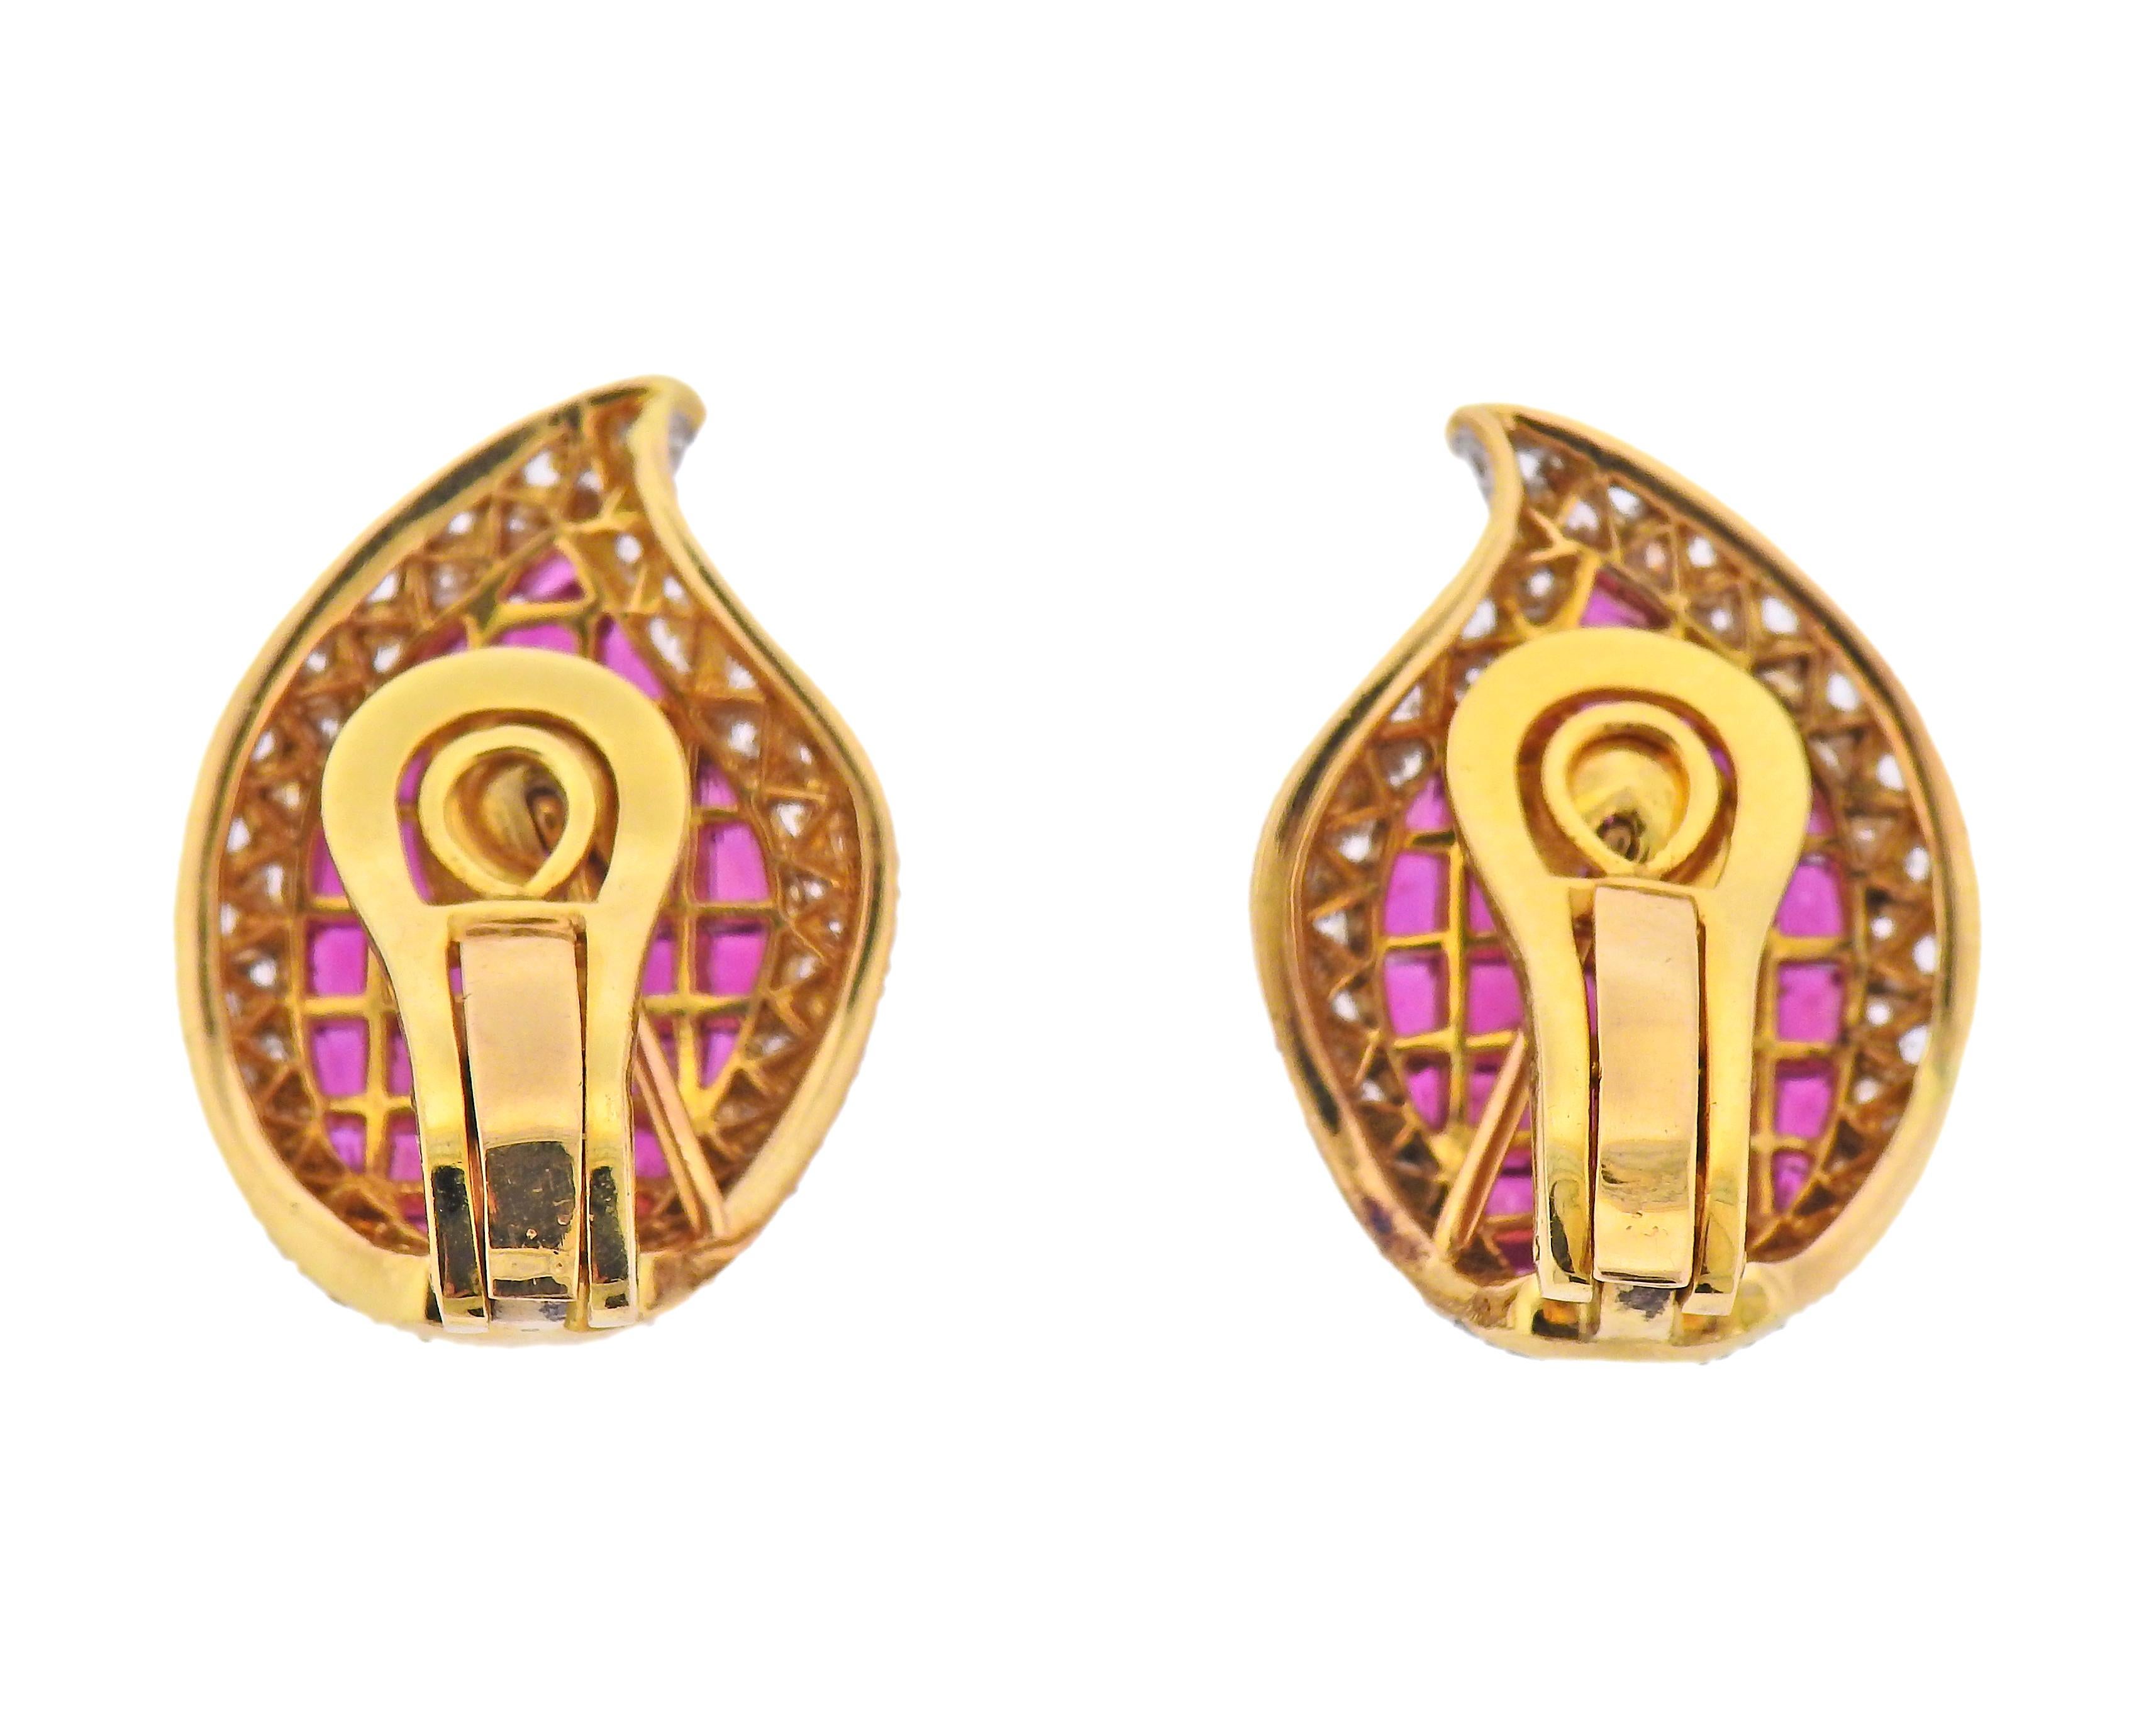 Pair of 18k gold earrings with invisible set rubies and approx. 1.60cts in diamonds. Earrings are 25mm x 17mm. Weight - 14 grams. 